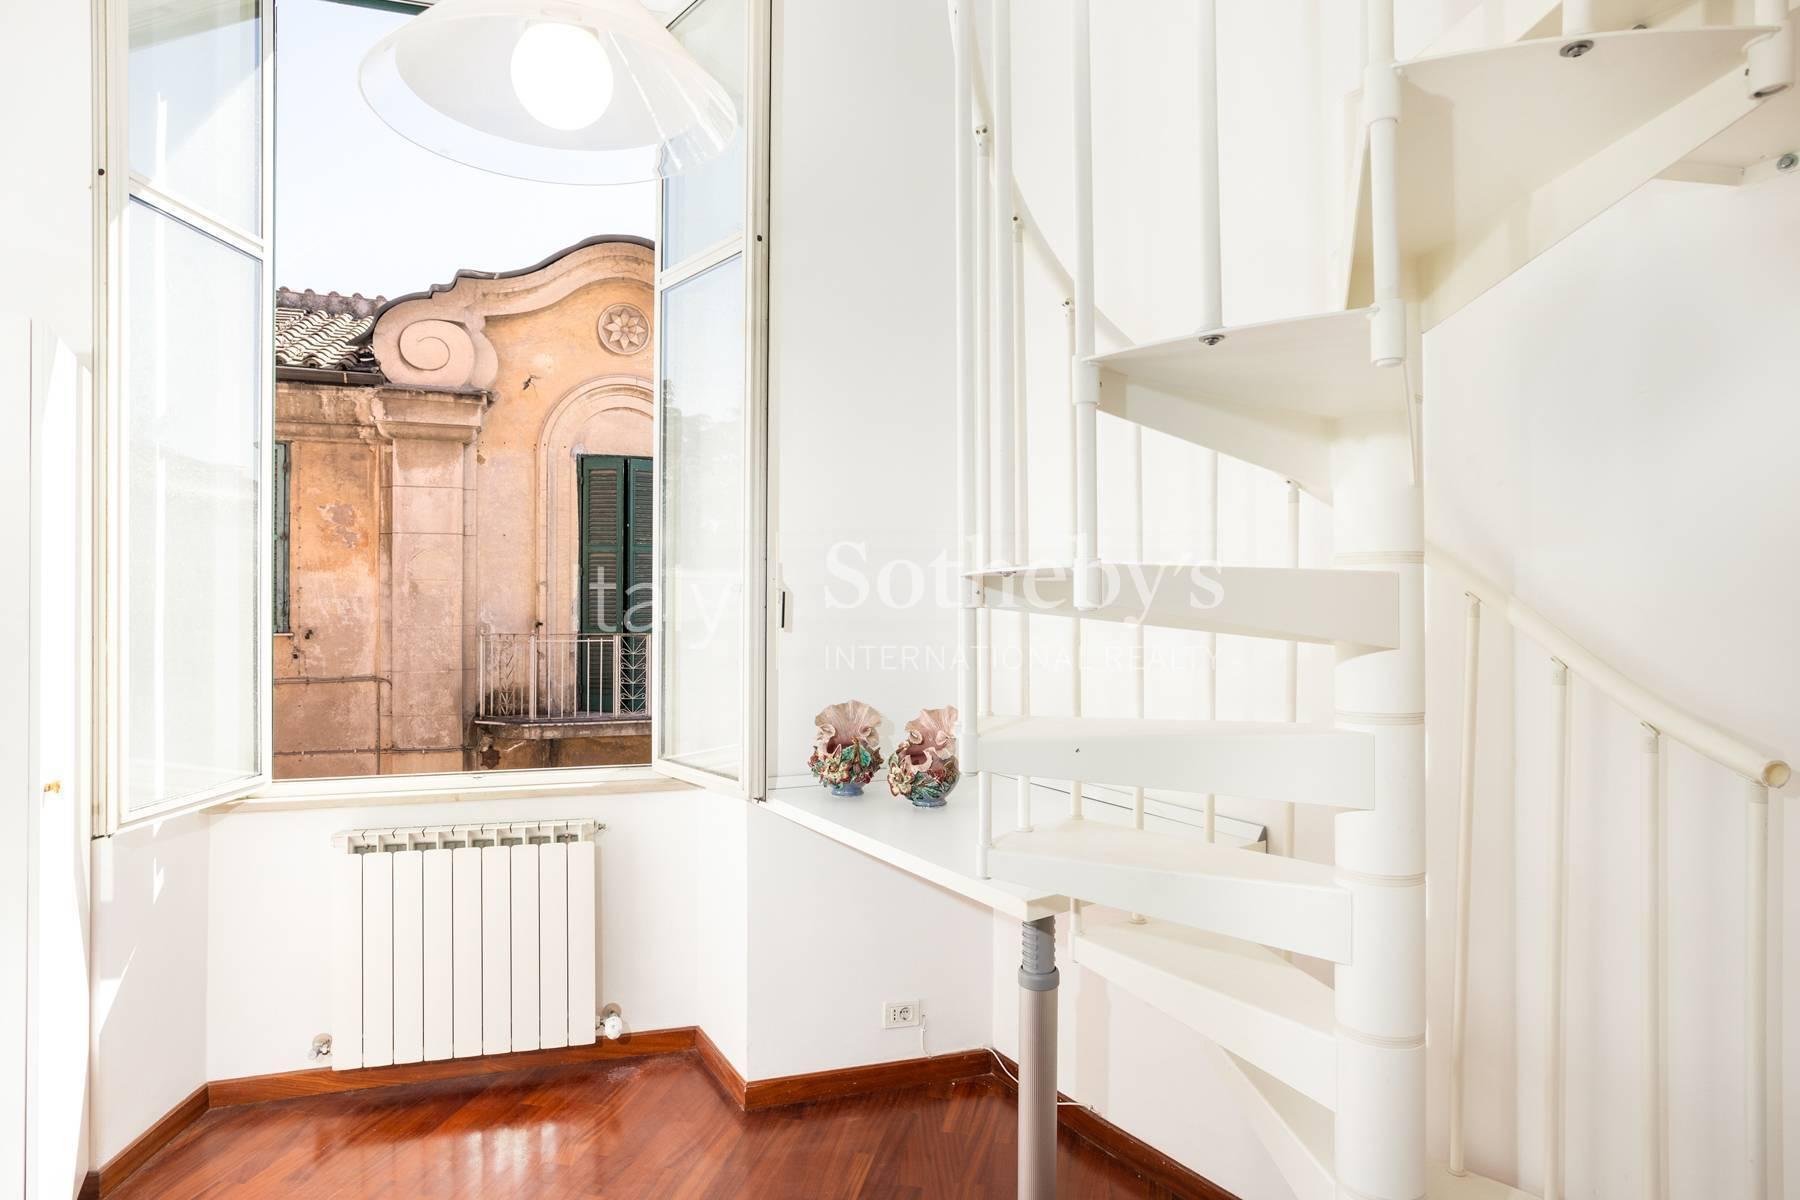 Stunning views for this bright flat close to the Colosseum - 6